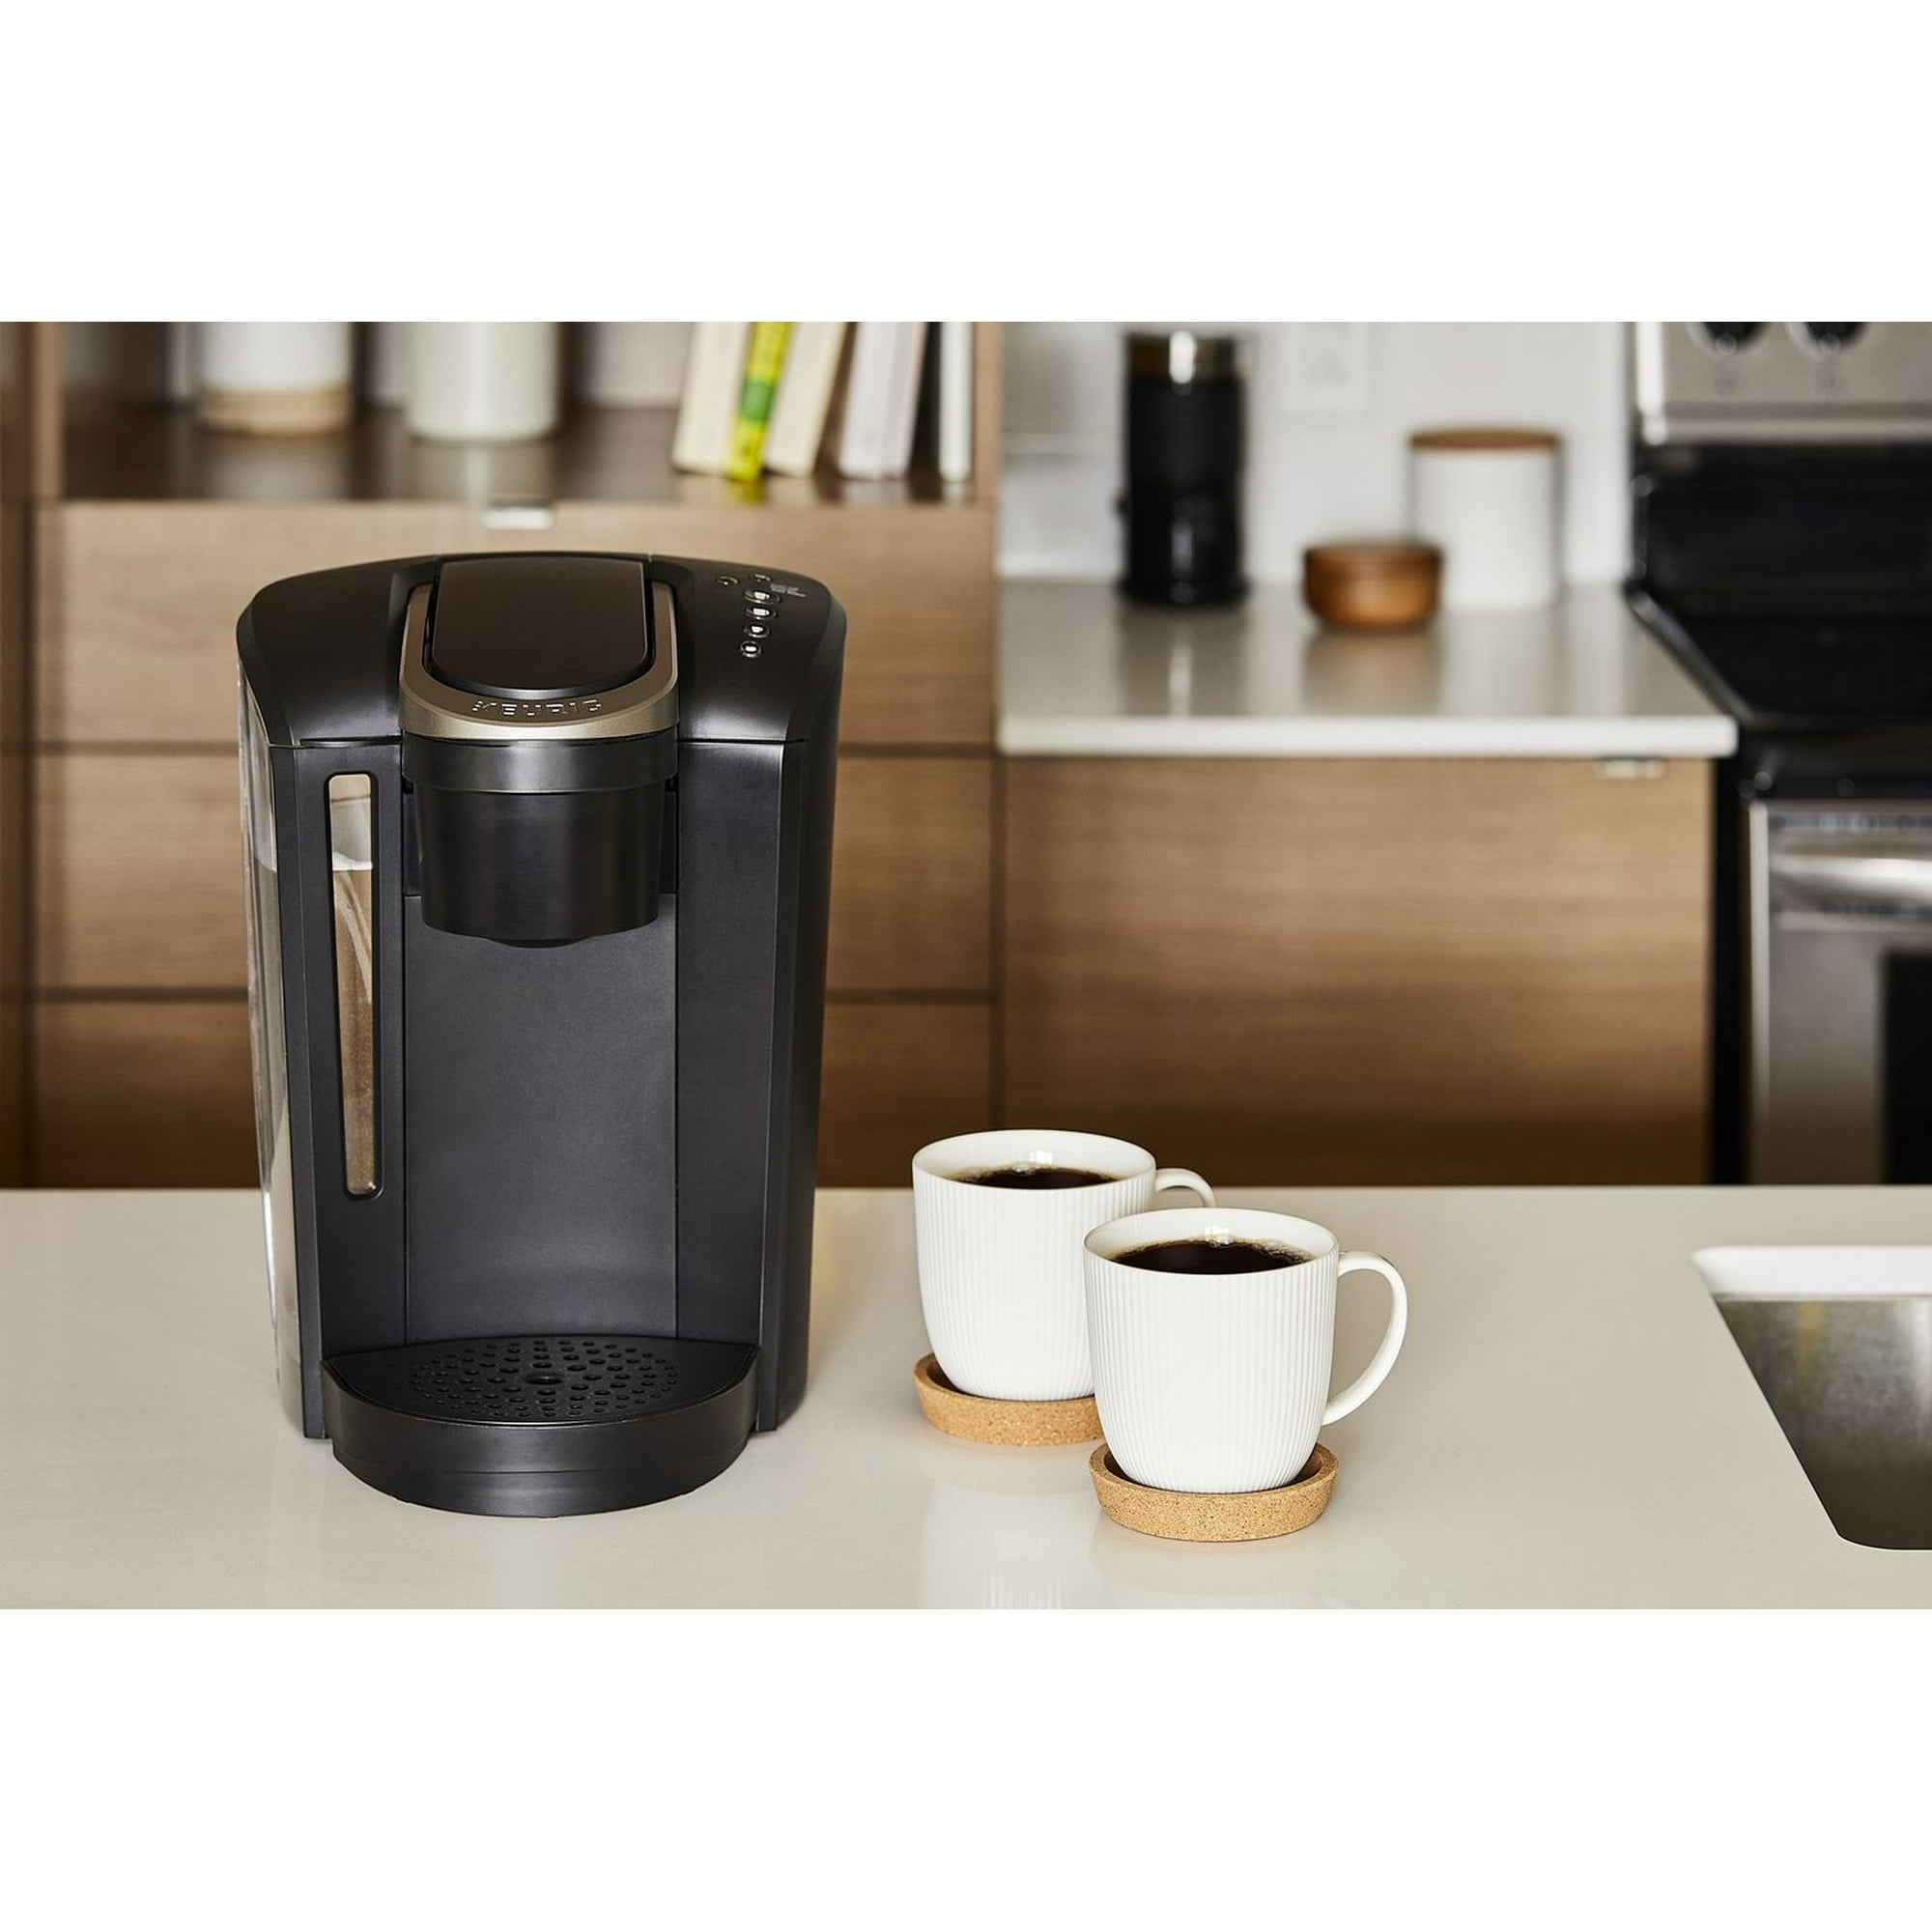 Keurig K-Mini Single Serve K-Cup Pod Coffee Maker, Brew any cup size  between 6 to 12oz 